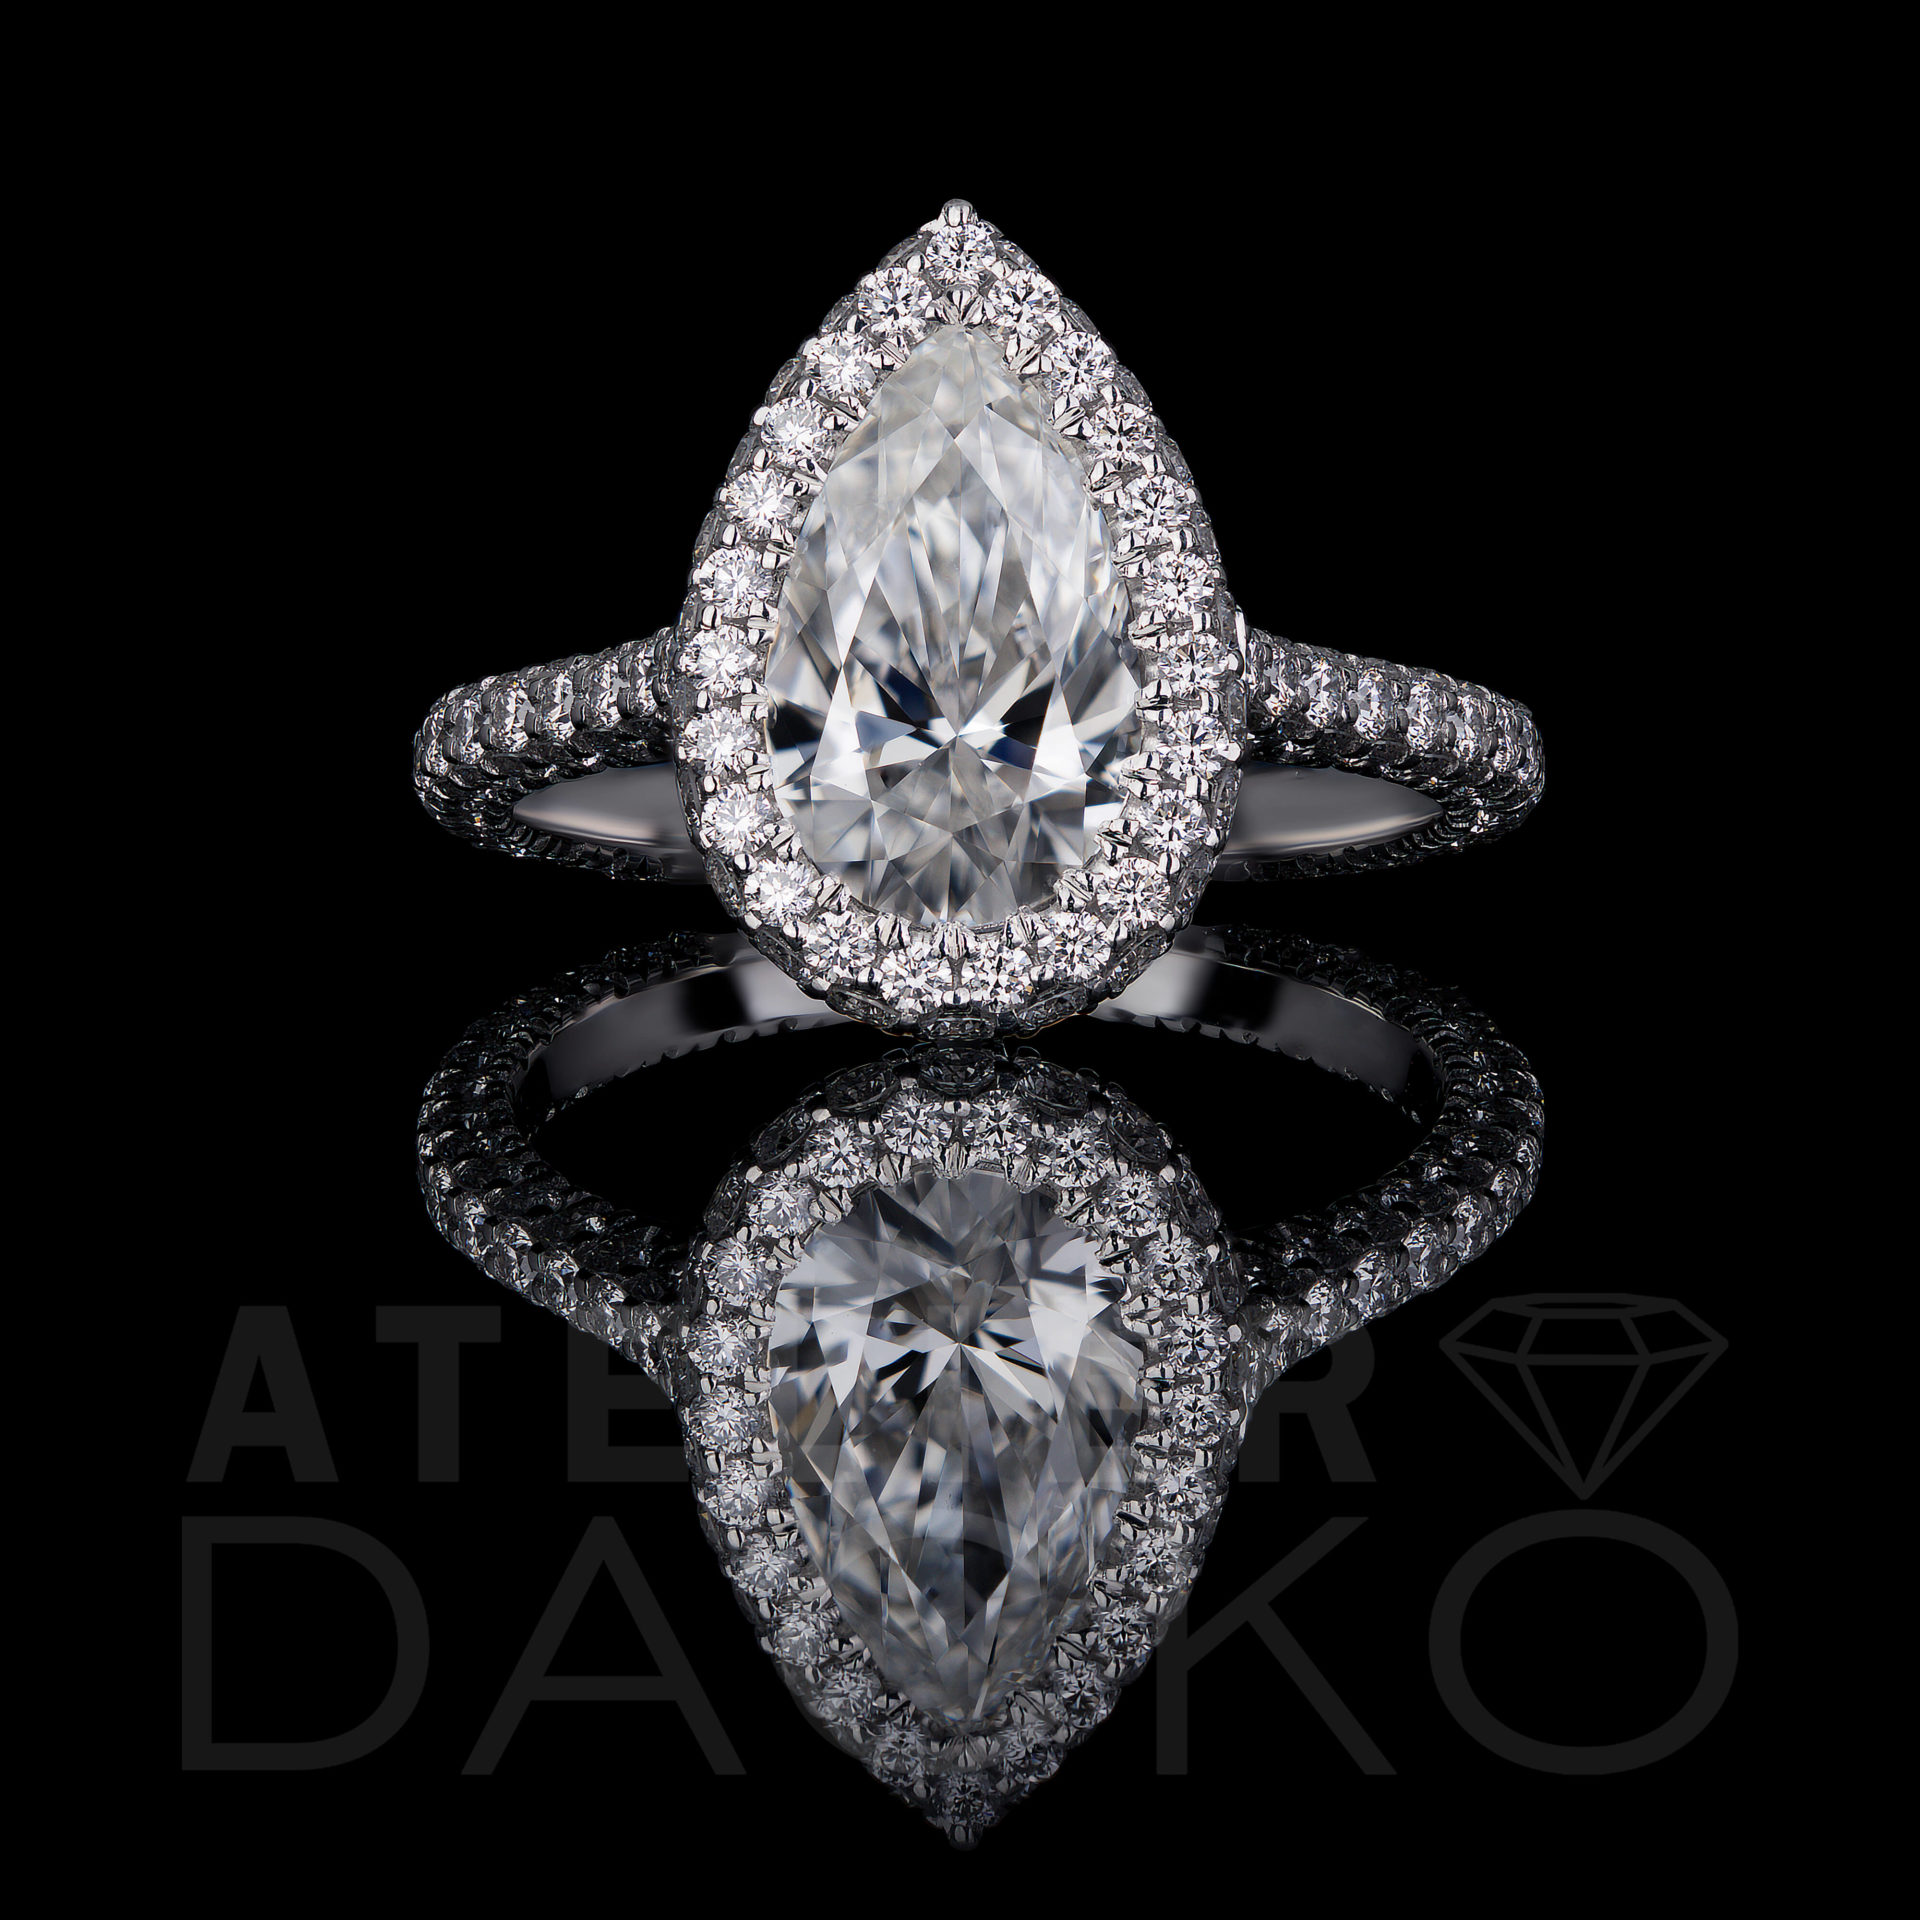 AD024 - 1.20 CT Pear Shaped Diamond Engagement Ring in Halo Setting - 1